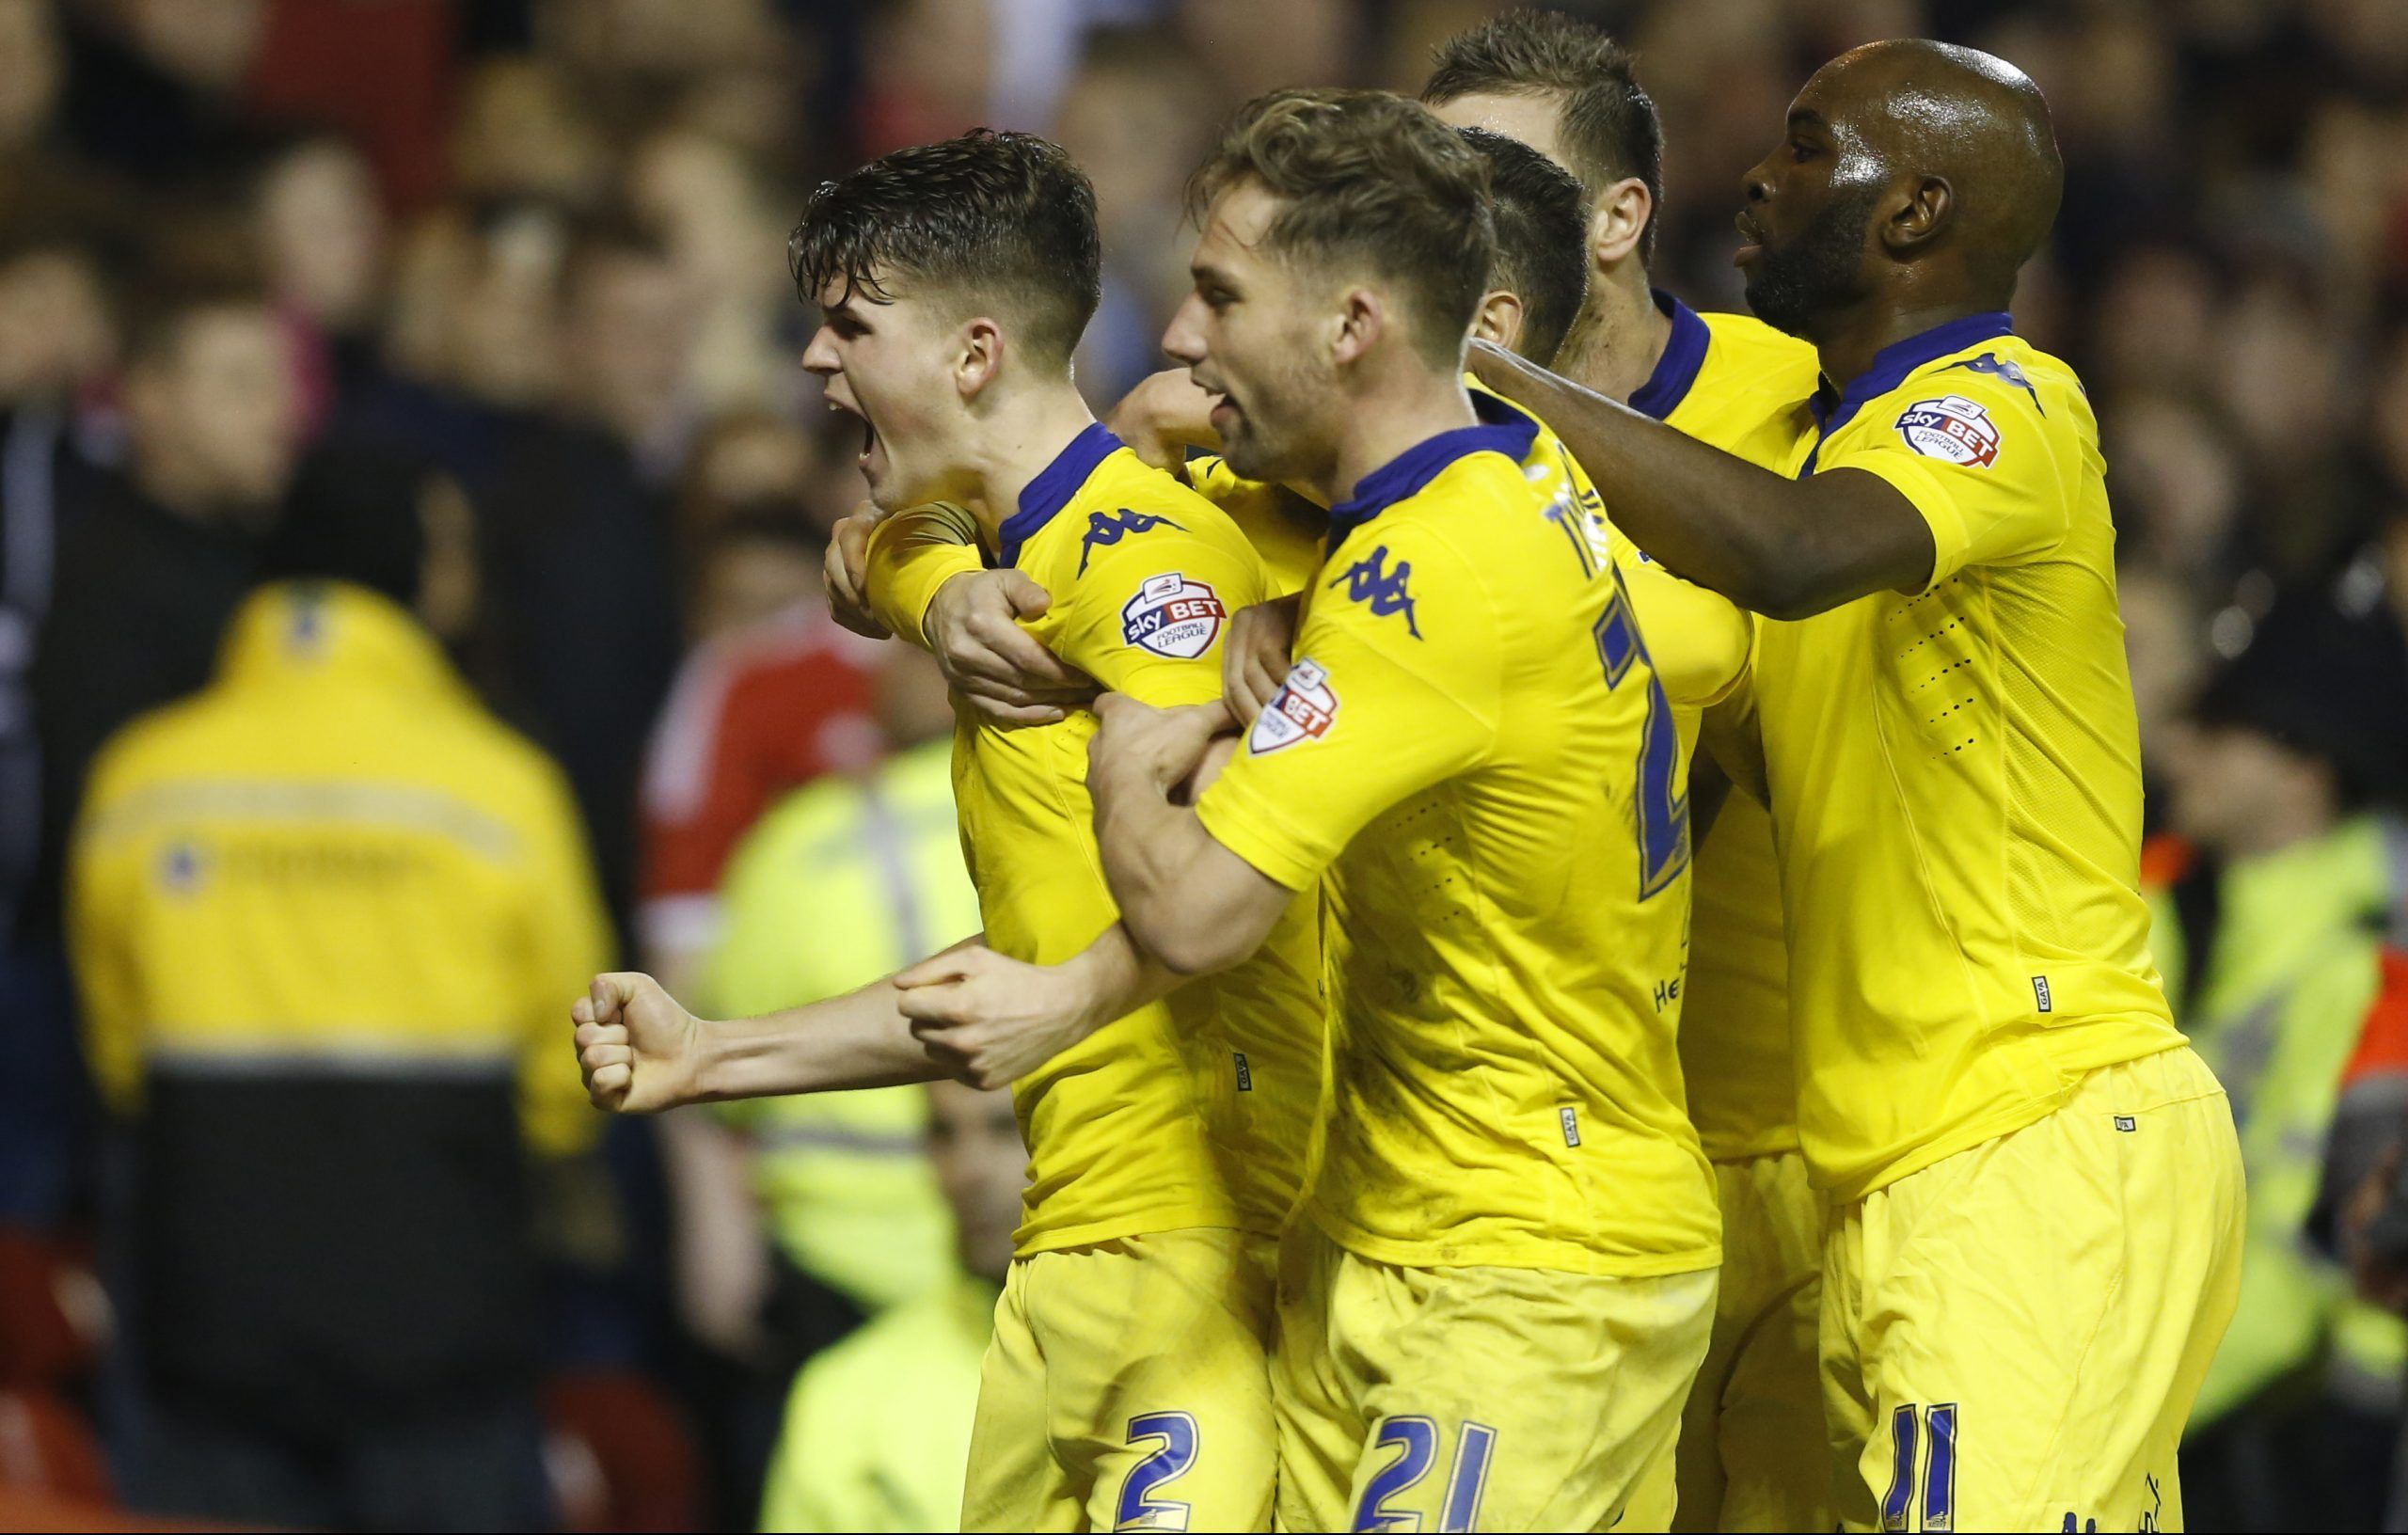 Football Soccer - Nottingham Forest v Leeds United - Sky Bet Football League Championship - The City Ground - 27/12/15 
Sam Byram celebrates with team mates after scoring the first goal for Leeds 
Mandatory Credit: Action Images / Carl Recine 
Livepic 
EDITORIAL USE ONLY. No use with unauthorized audio, video, data, fixture lists, club/league logos or 